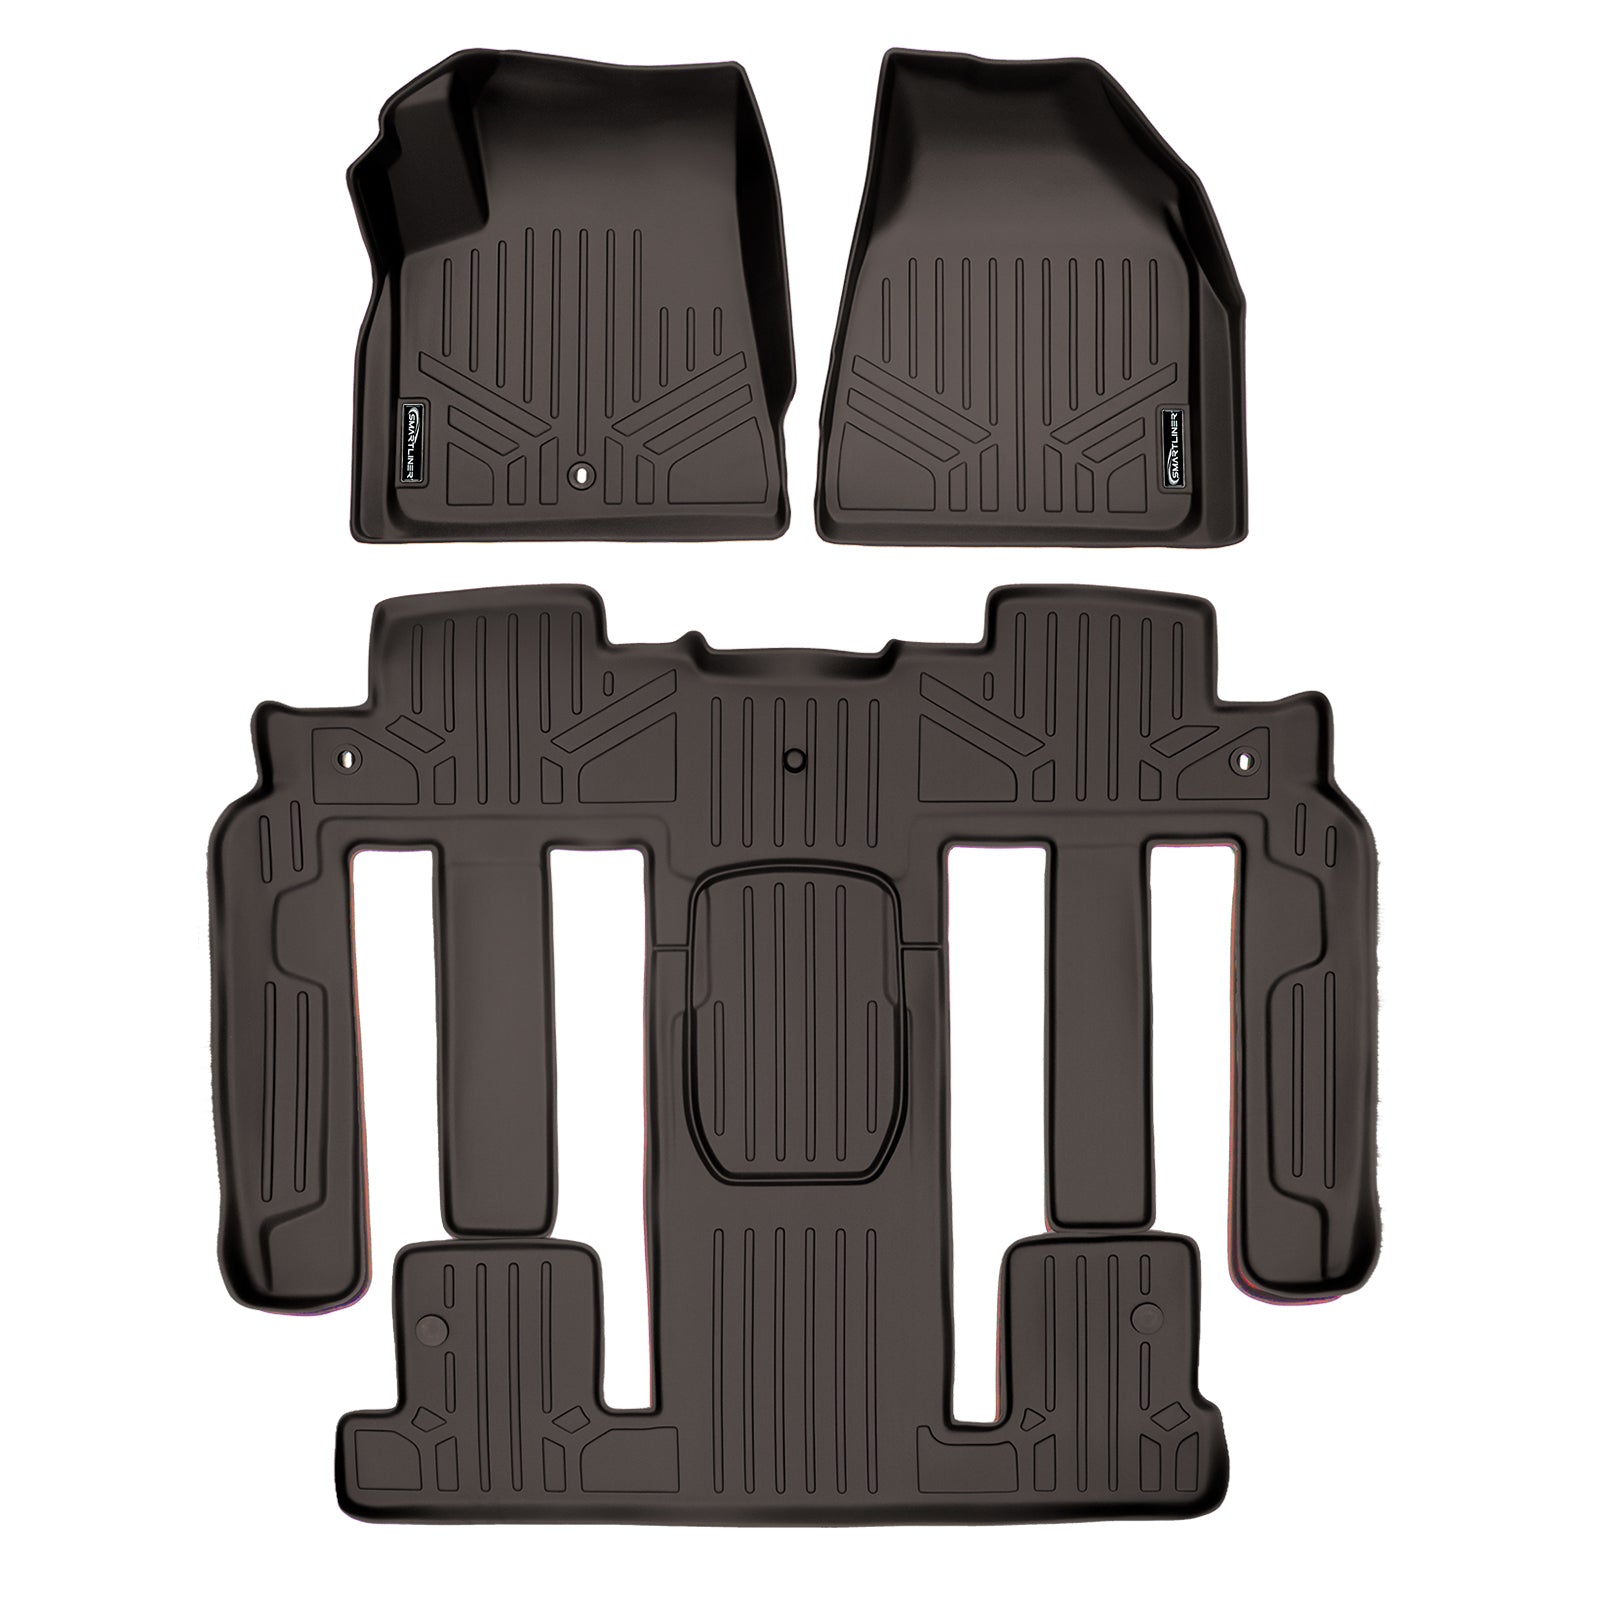 SMARTLINER Custom Fit Floor Liners For Traverse/Enclave with 2nd Row Bucket Seats